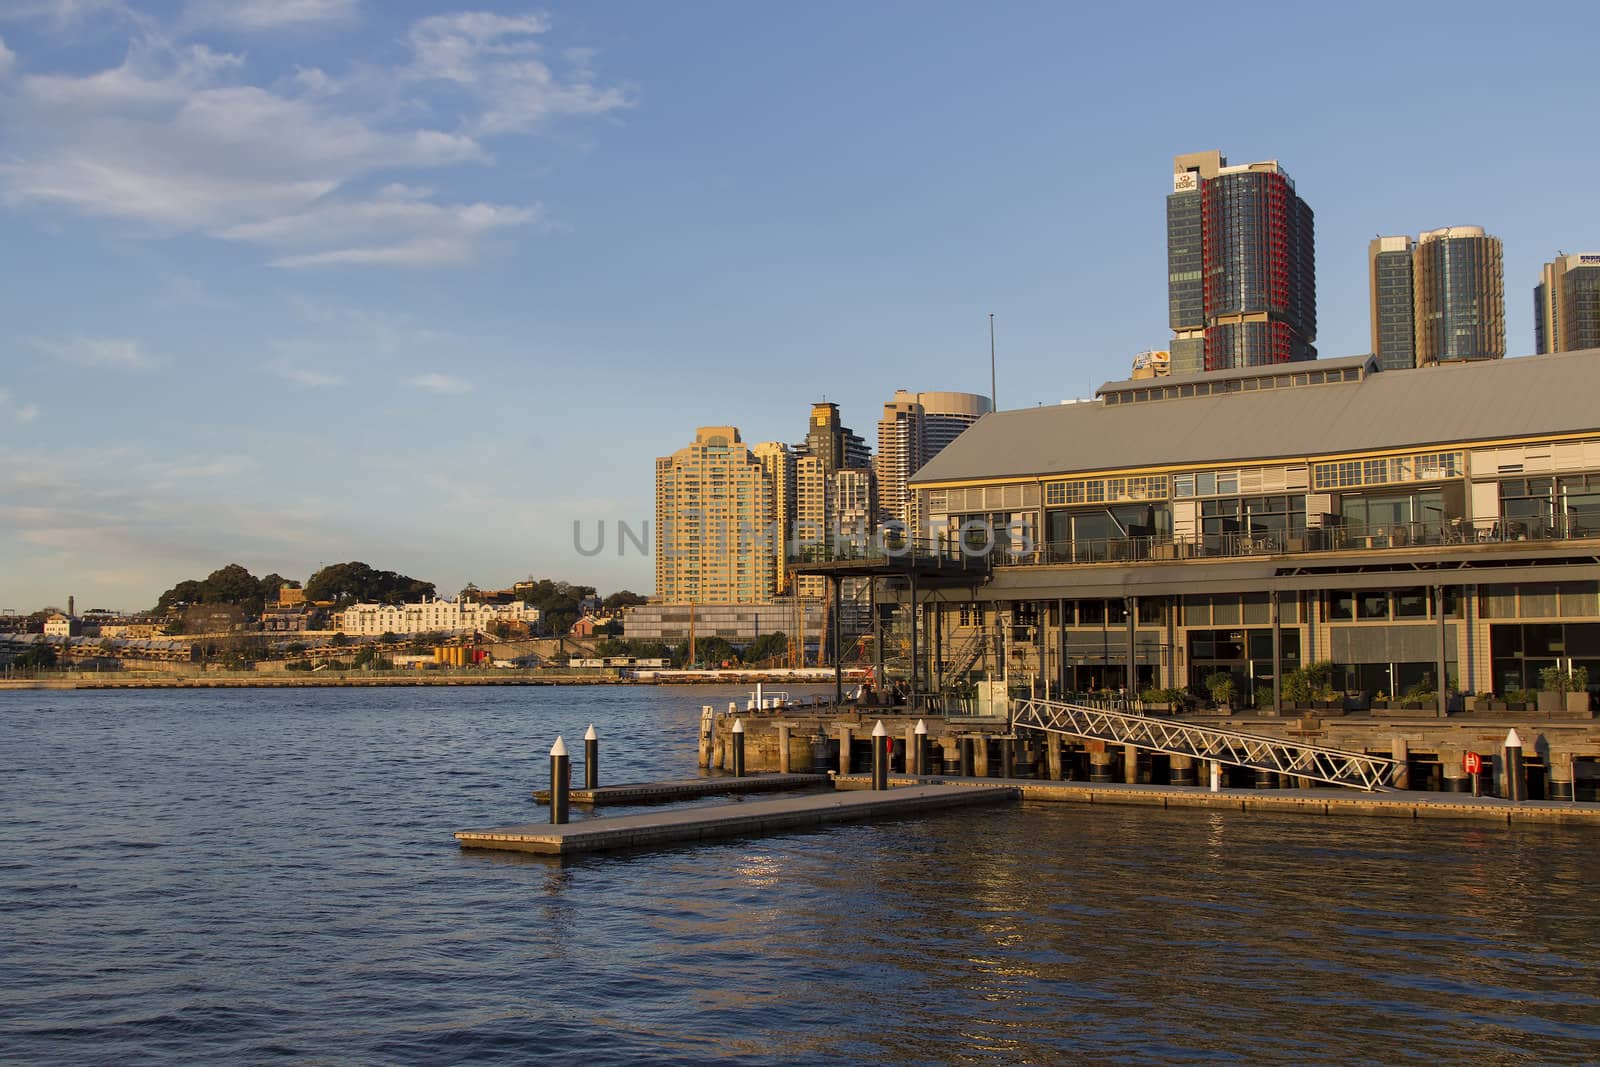 Jones Bay wharf in Sydney with skyscrapers in the background by jaaske